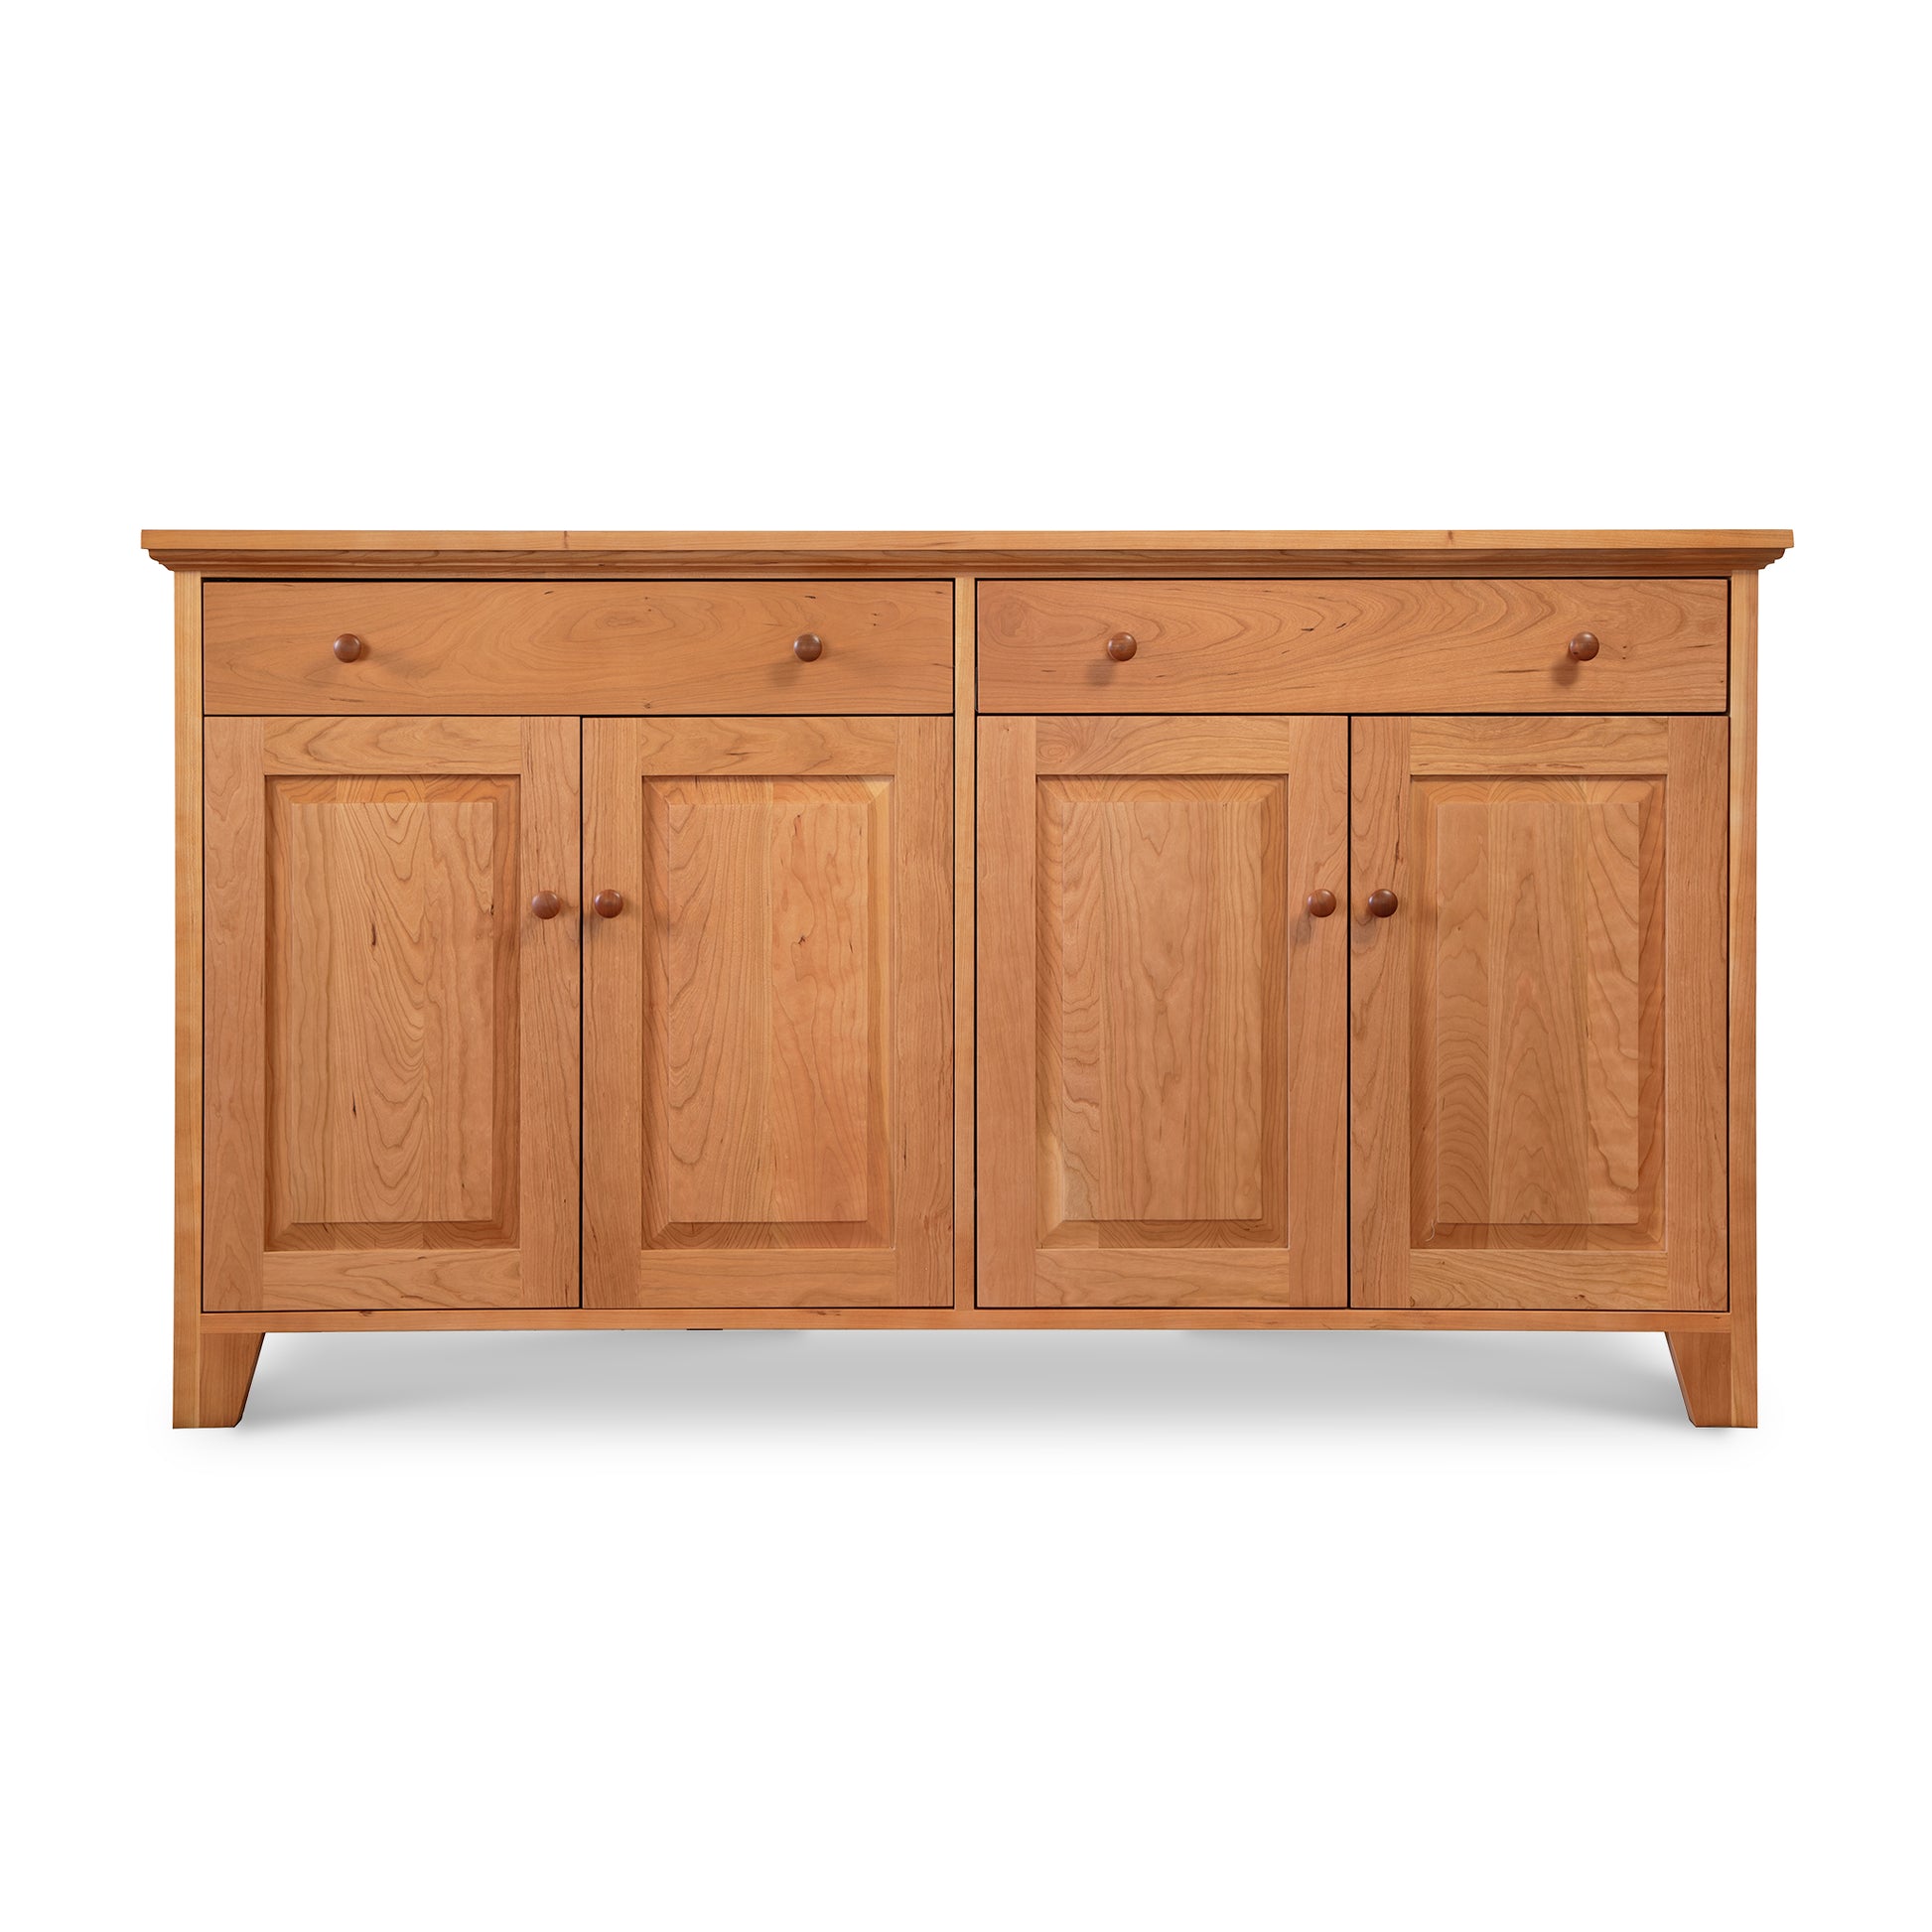 This Classic Country Buffet by Lyndon Furniture showcases Vermont craftsmanship with its solid hardwood construction. It features two doors and two drawers for ample storage space.